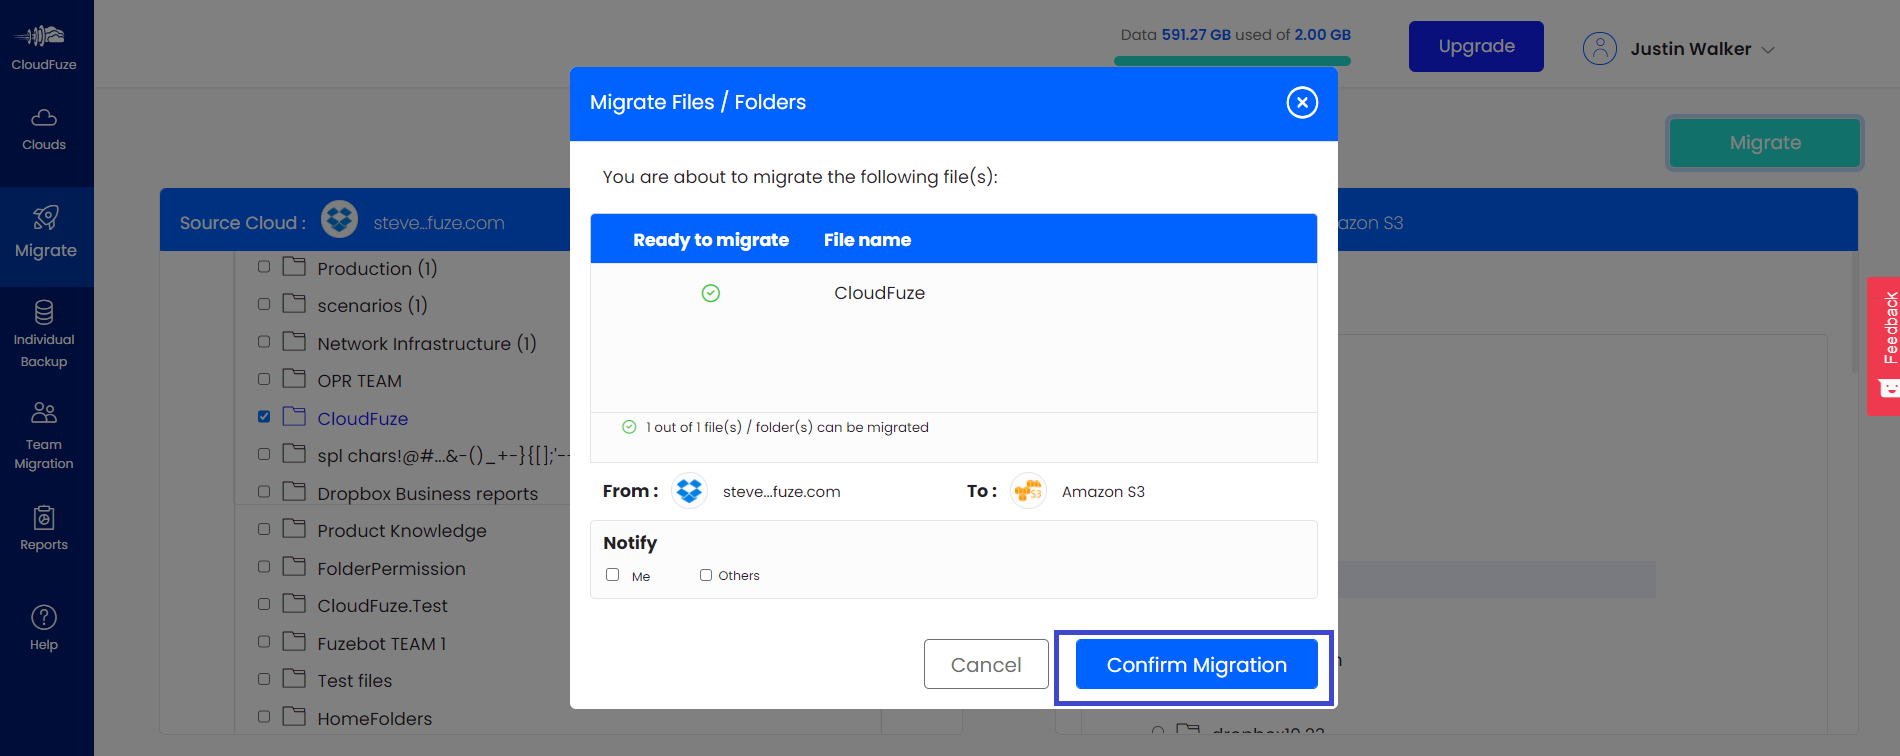 Preview and Confirm Migration